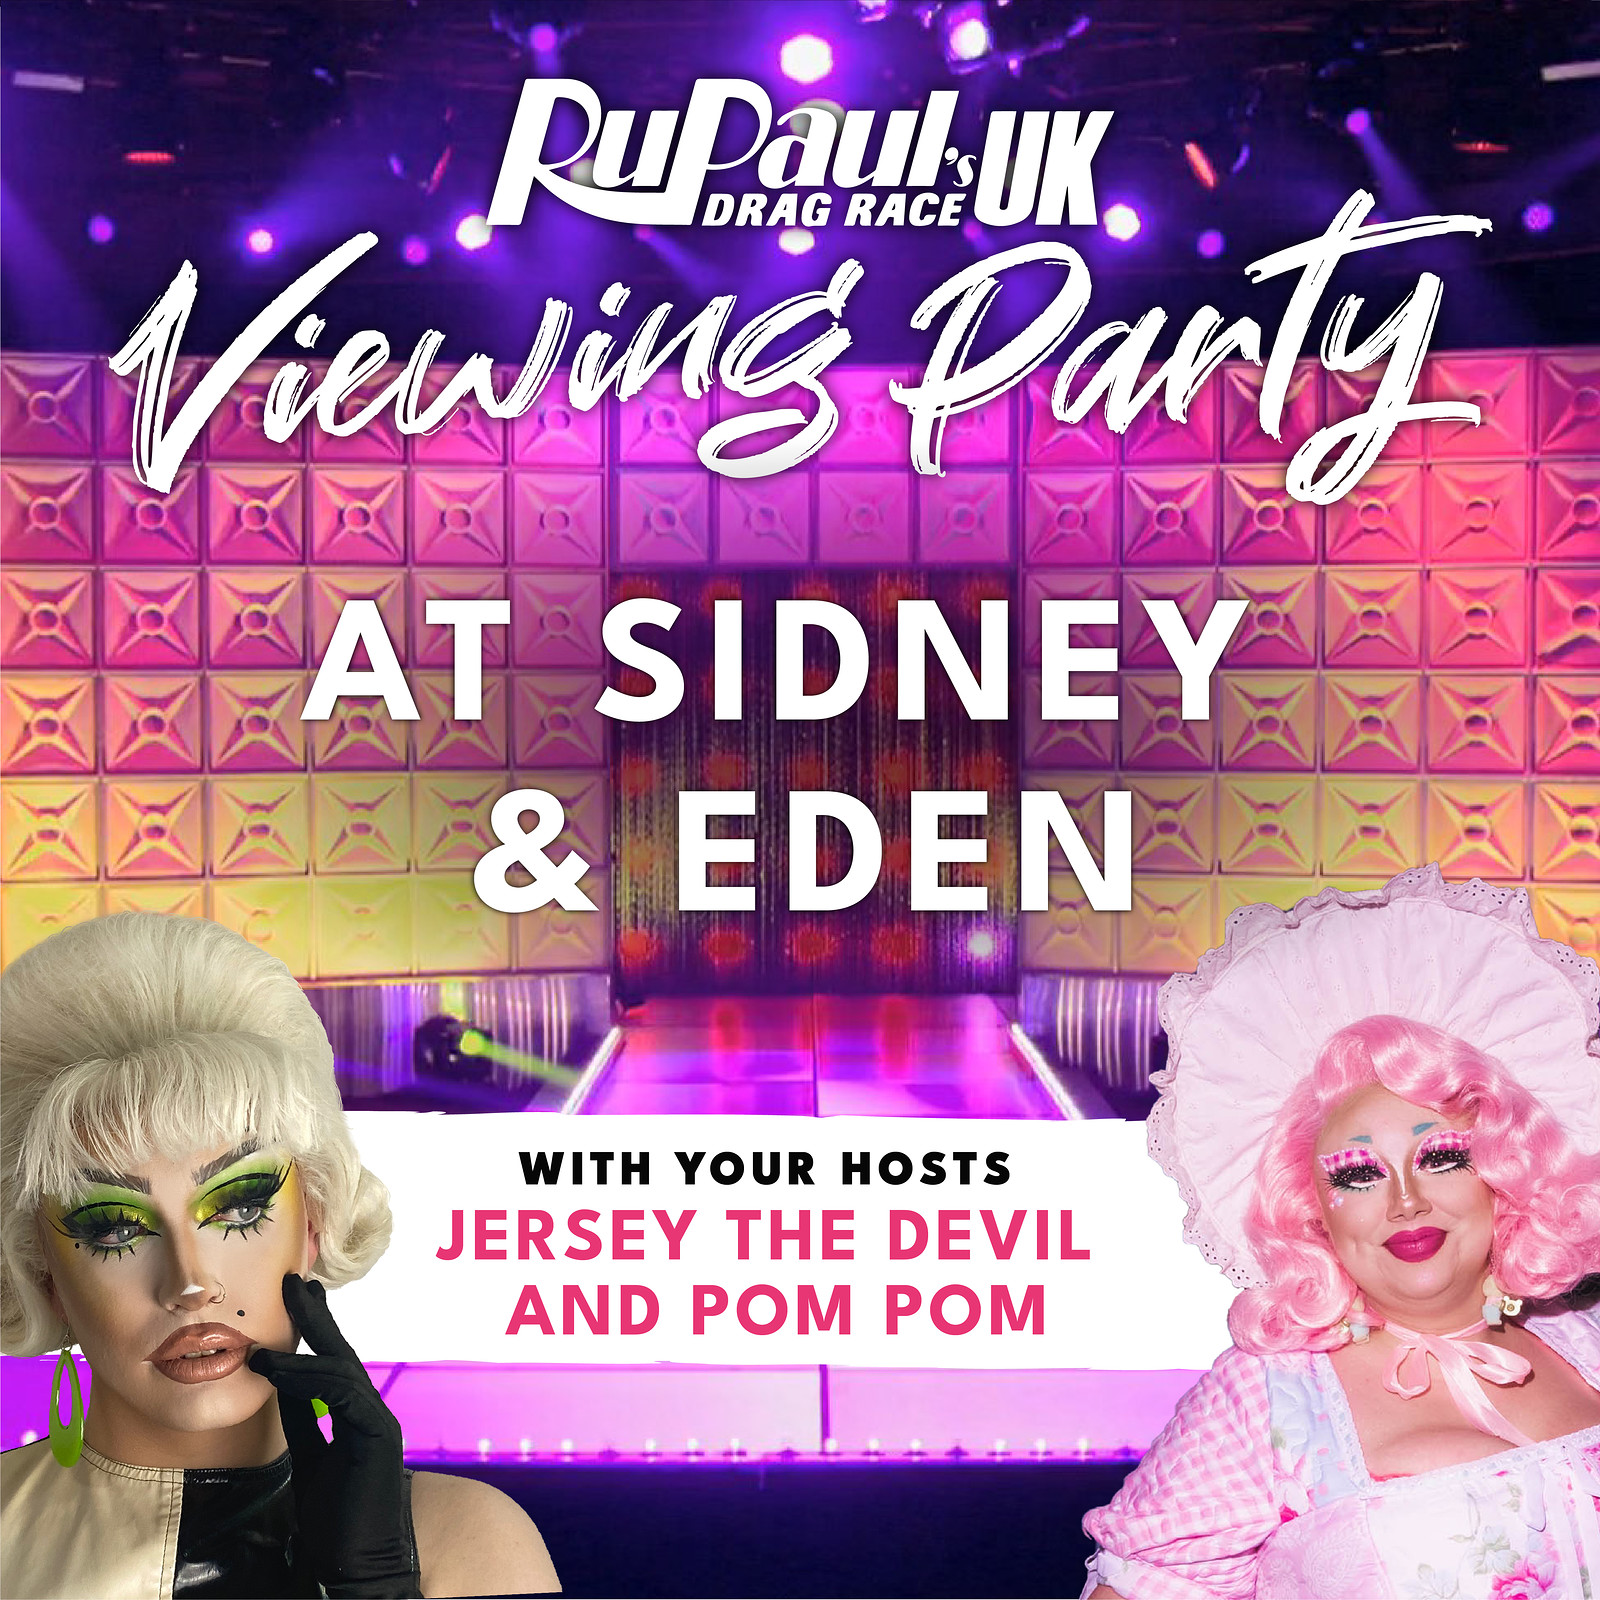 RuPaul's Drag Race UK Episode 2 Viewing Party at Sidney & Eden